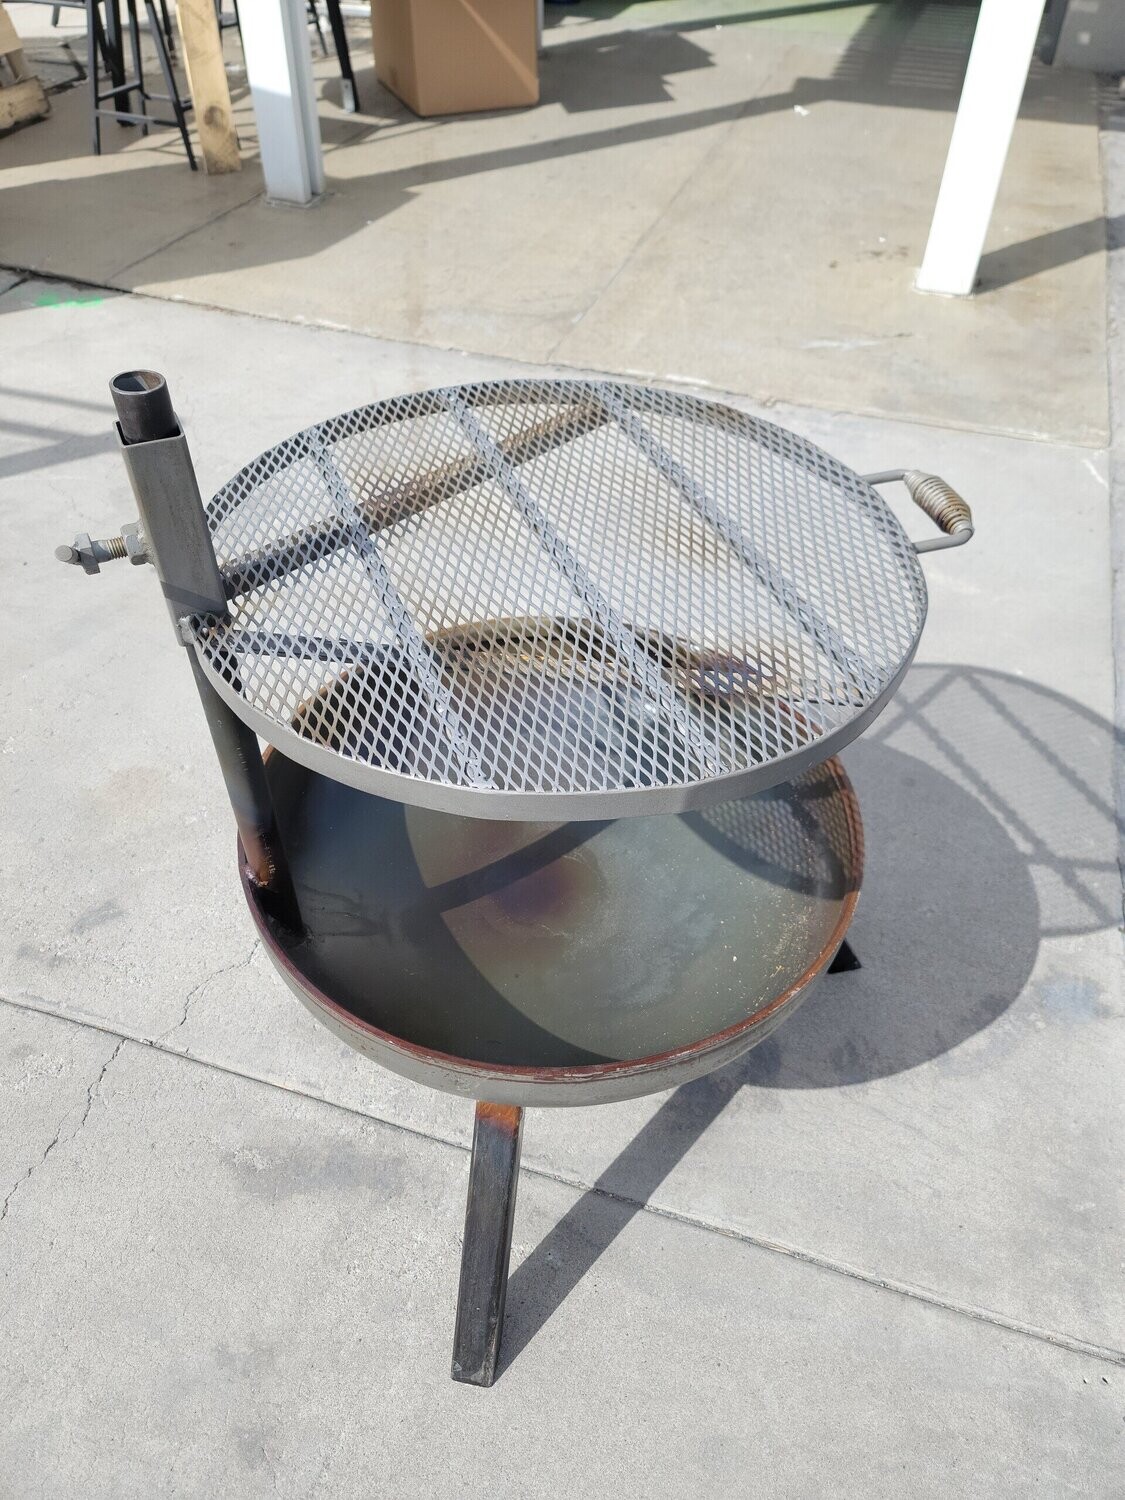 Cowboy Cooker / Fire Pit by Battle Born Smokers